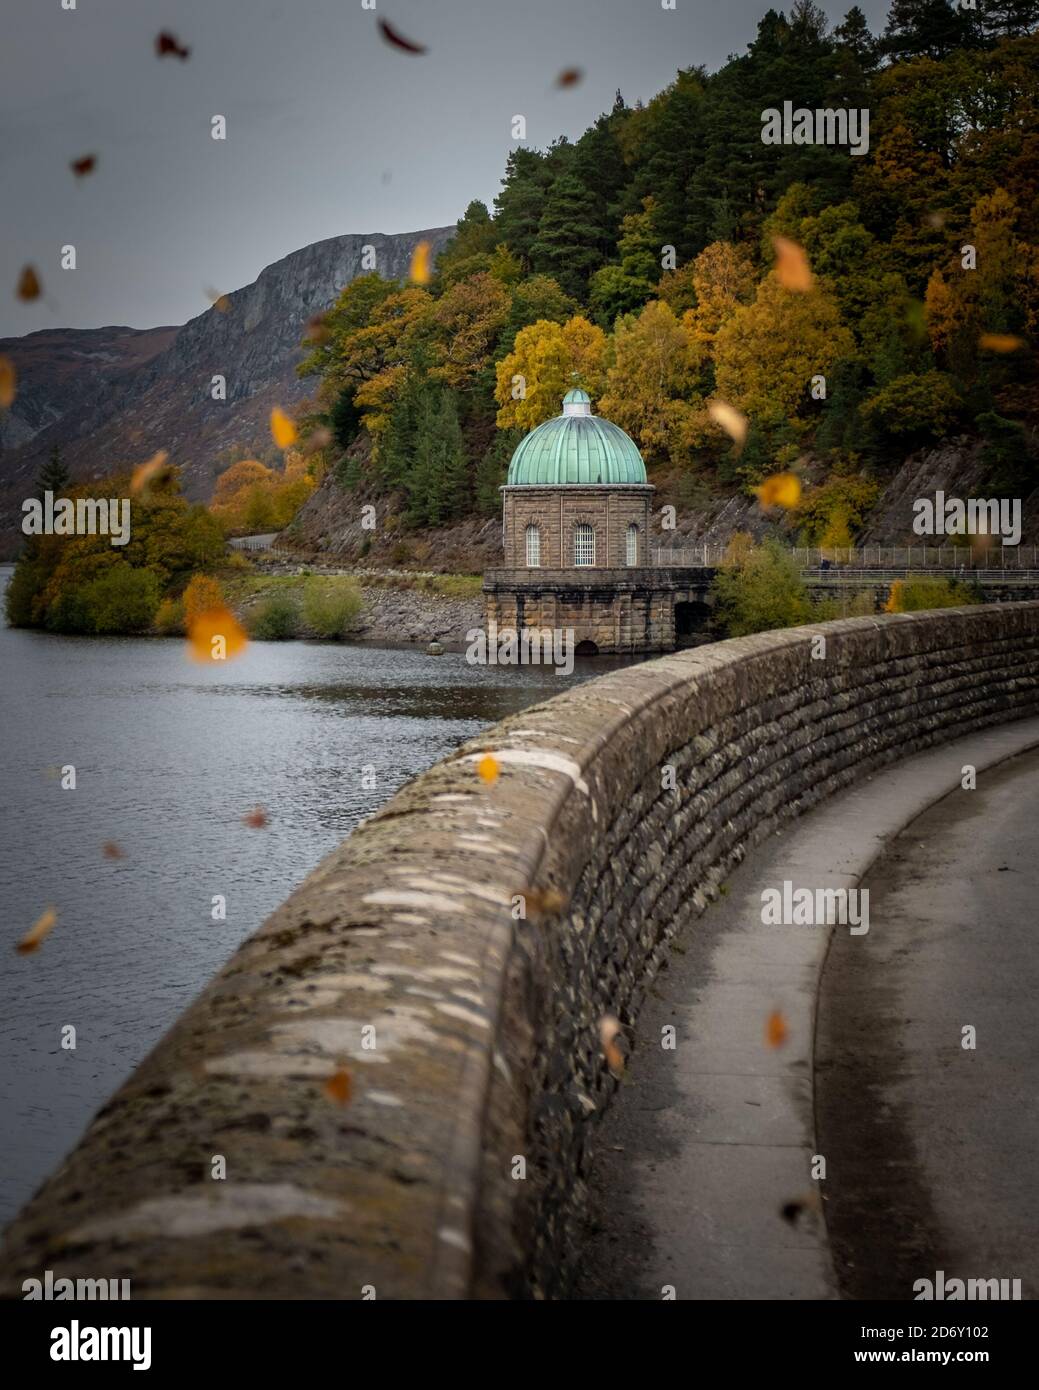 The Elan Valley Reservoirs are a chain of man-made lakes created from damming the Elan and Claerwen rivers within the Elan Valley in Mid Wales. Stock Photo